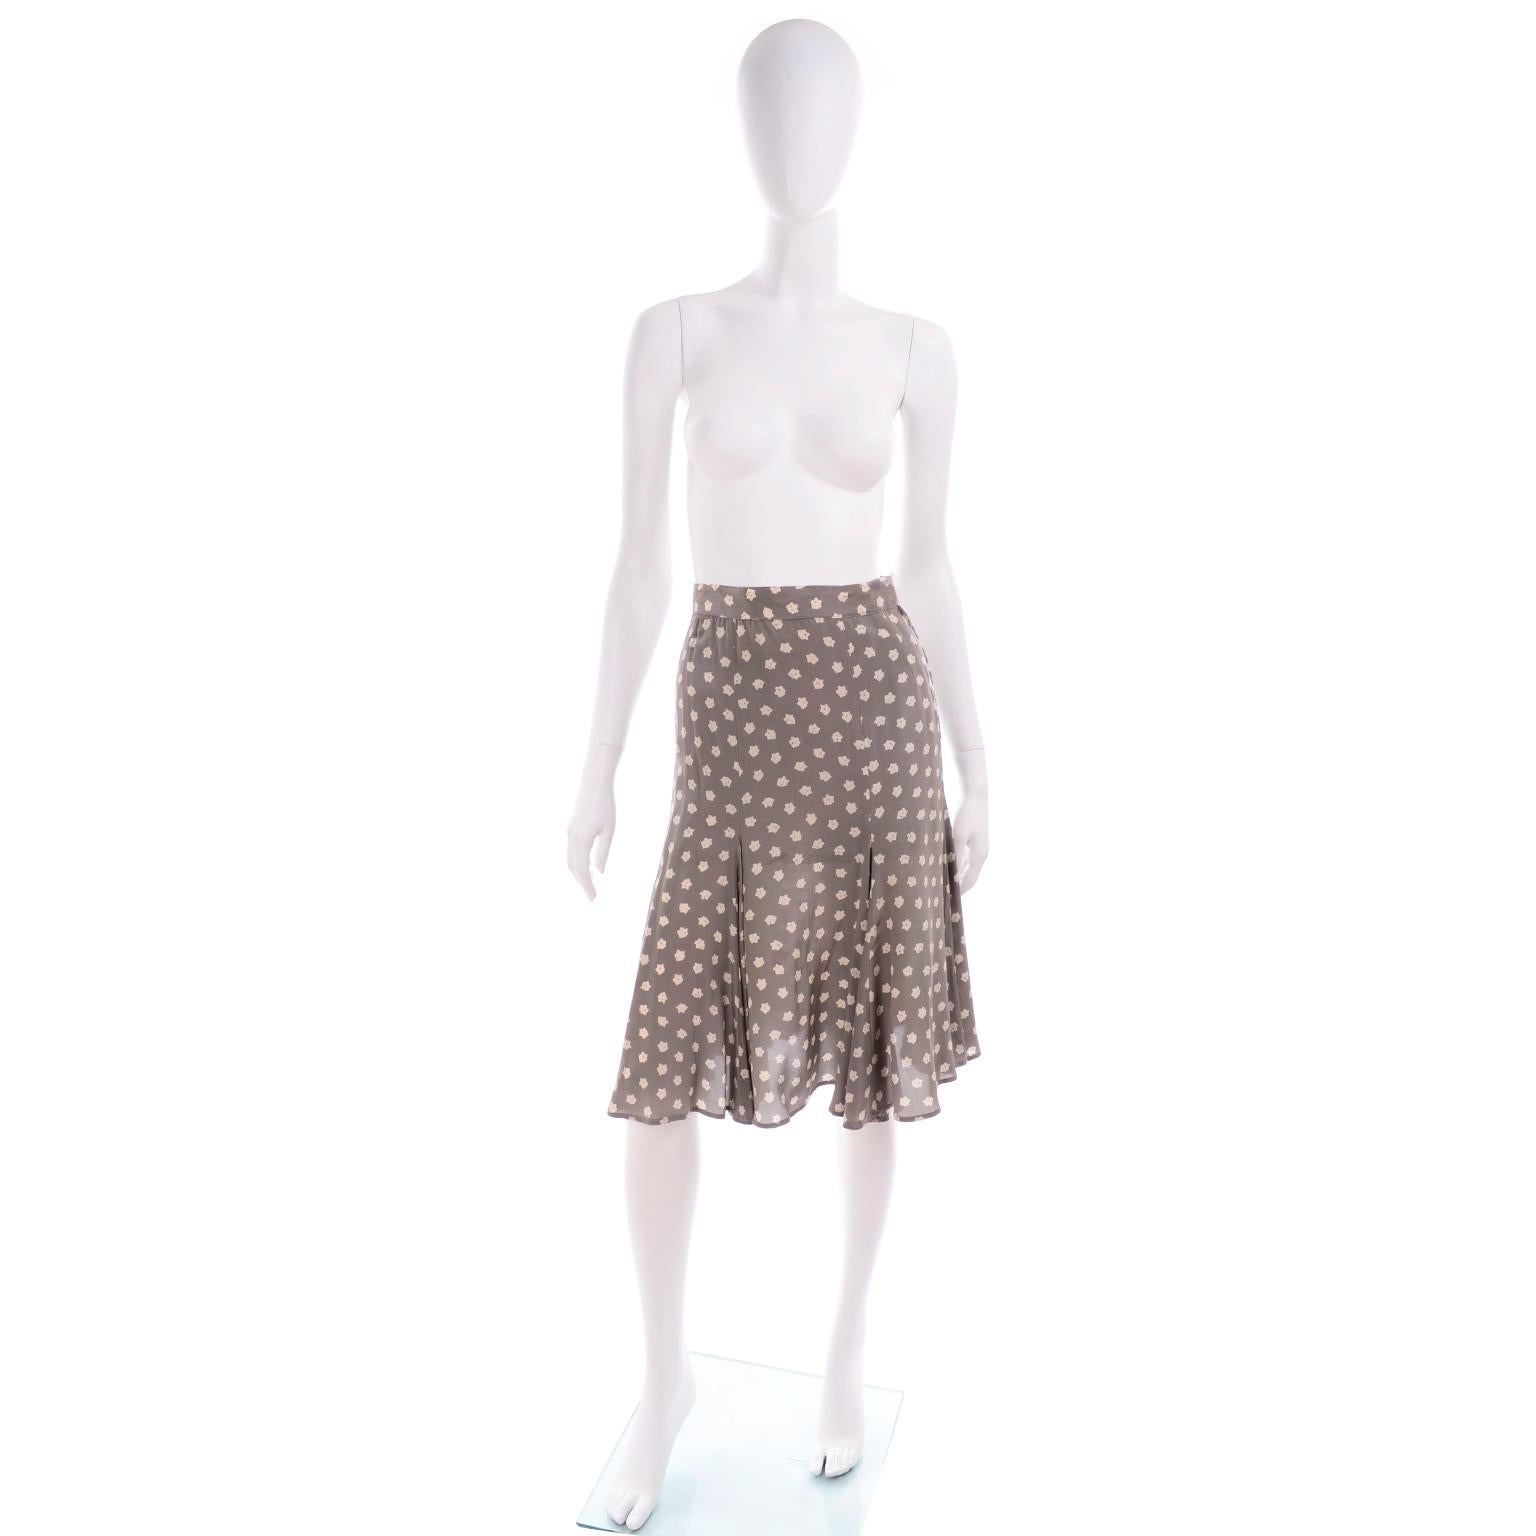 This is a pretty vintage skirt from Salvatore Ferragamo in a taupe/tan silk with cream flowers. The skirt closes with a metal zipper on the side and is fully lined. We love the pleats and the midi length. Labeled size 4 and made in Italy. Please